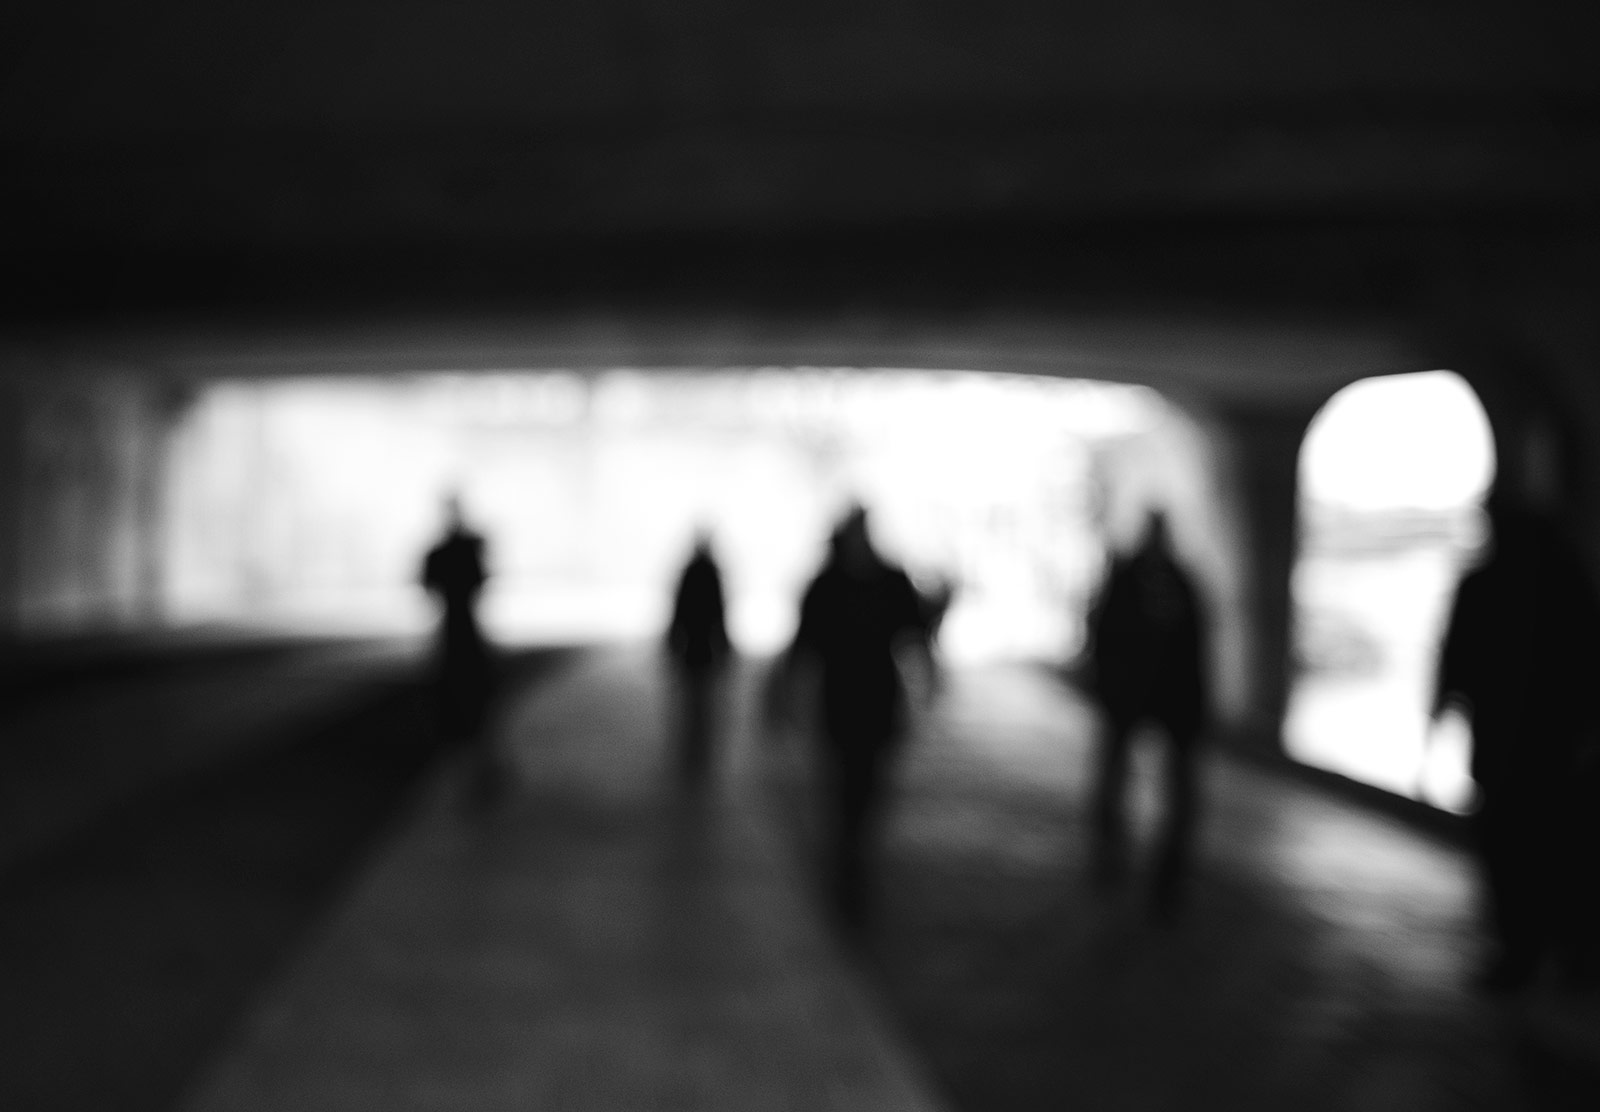 People in tunnel